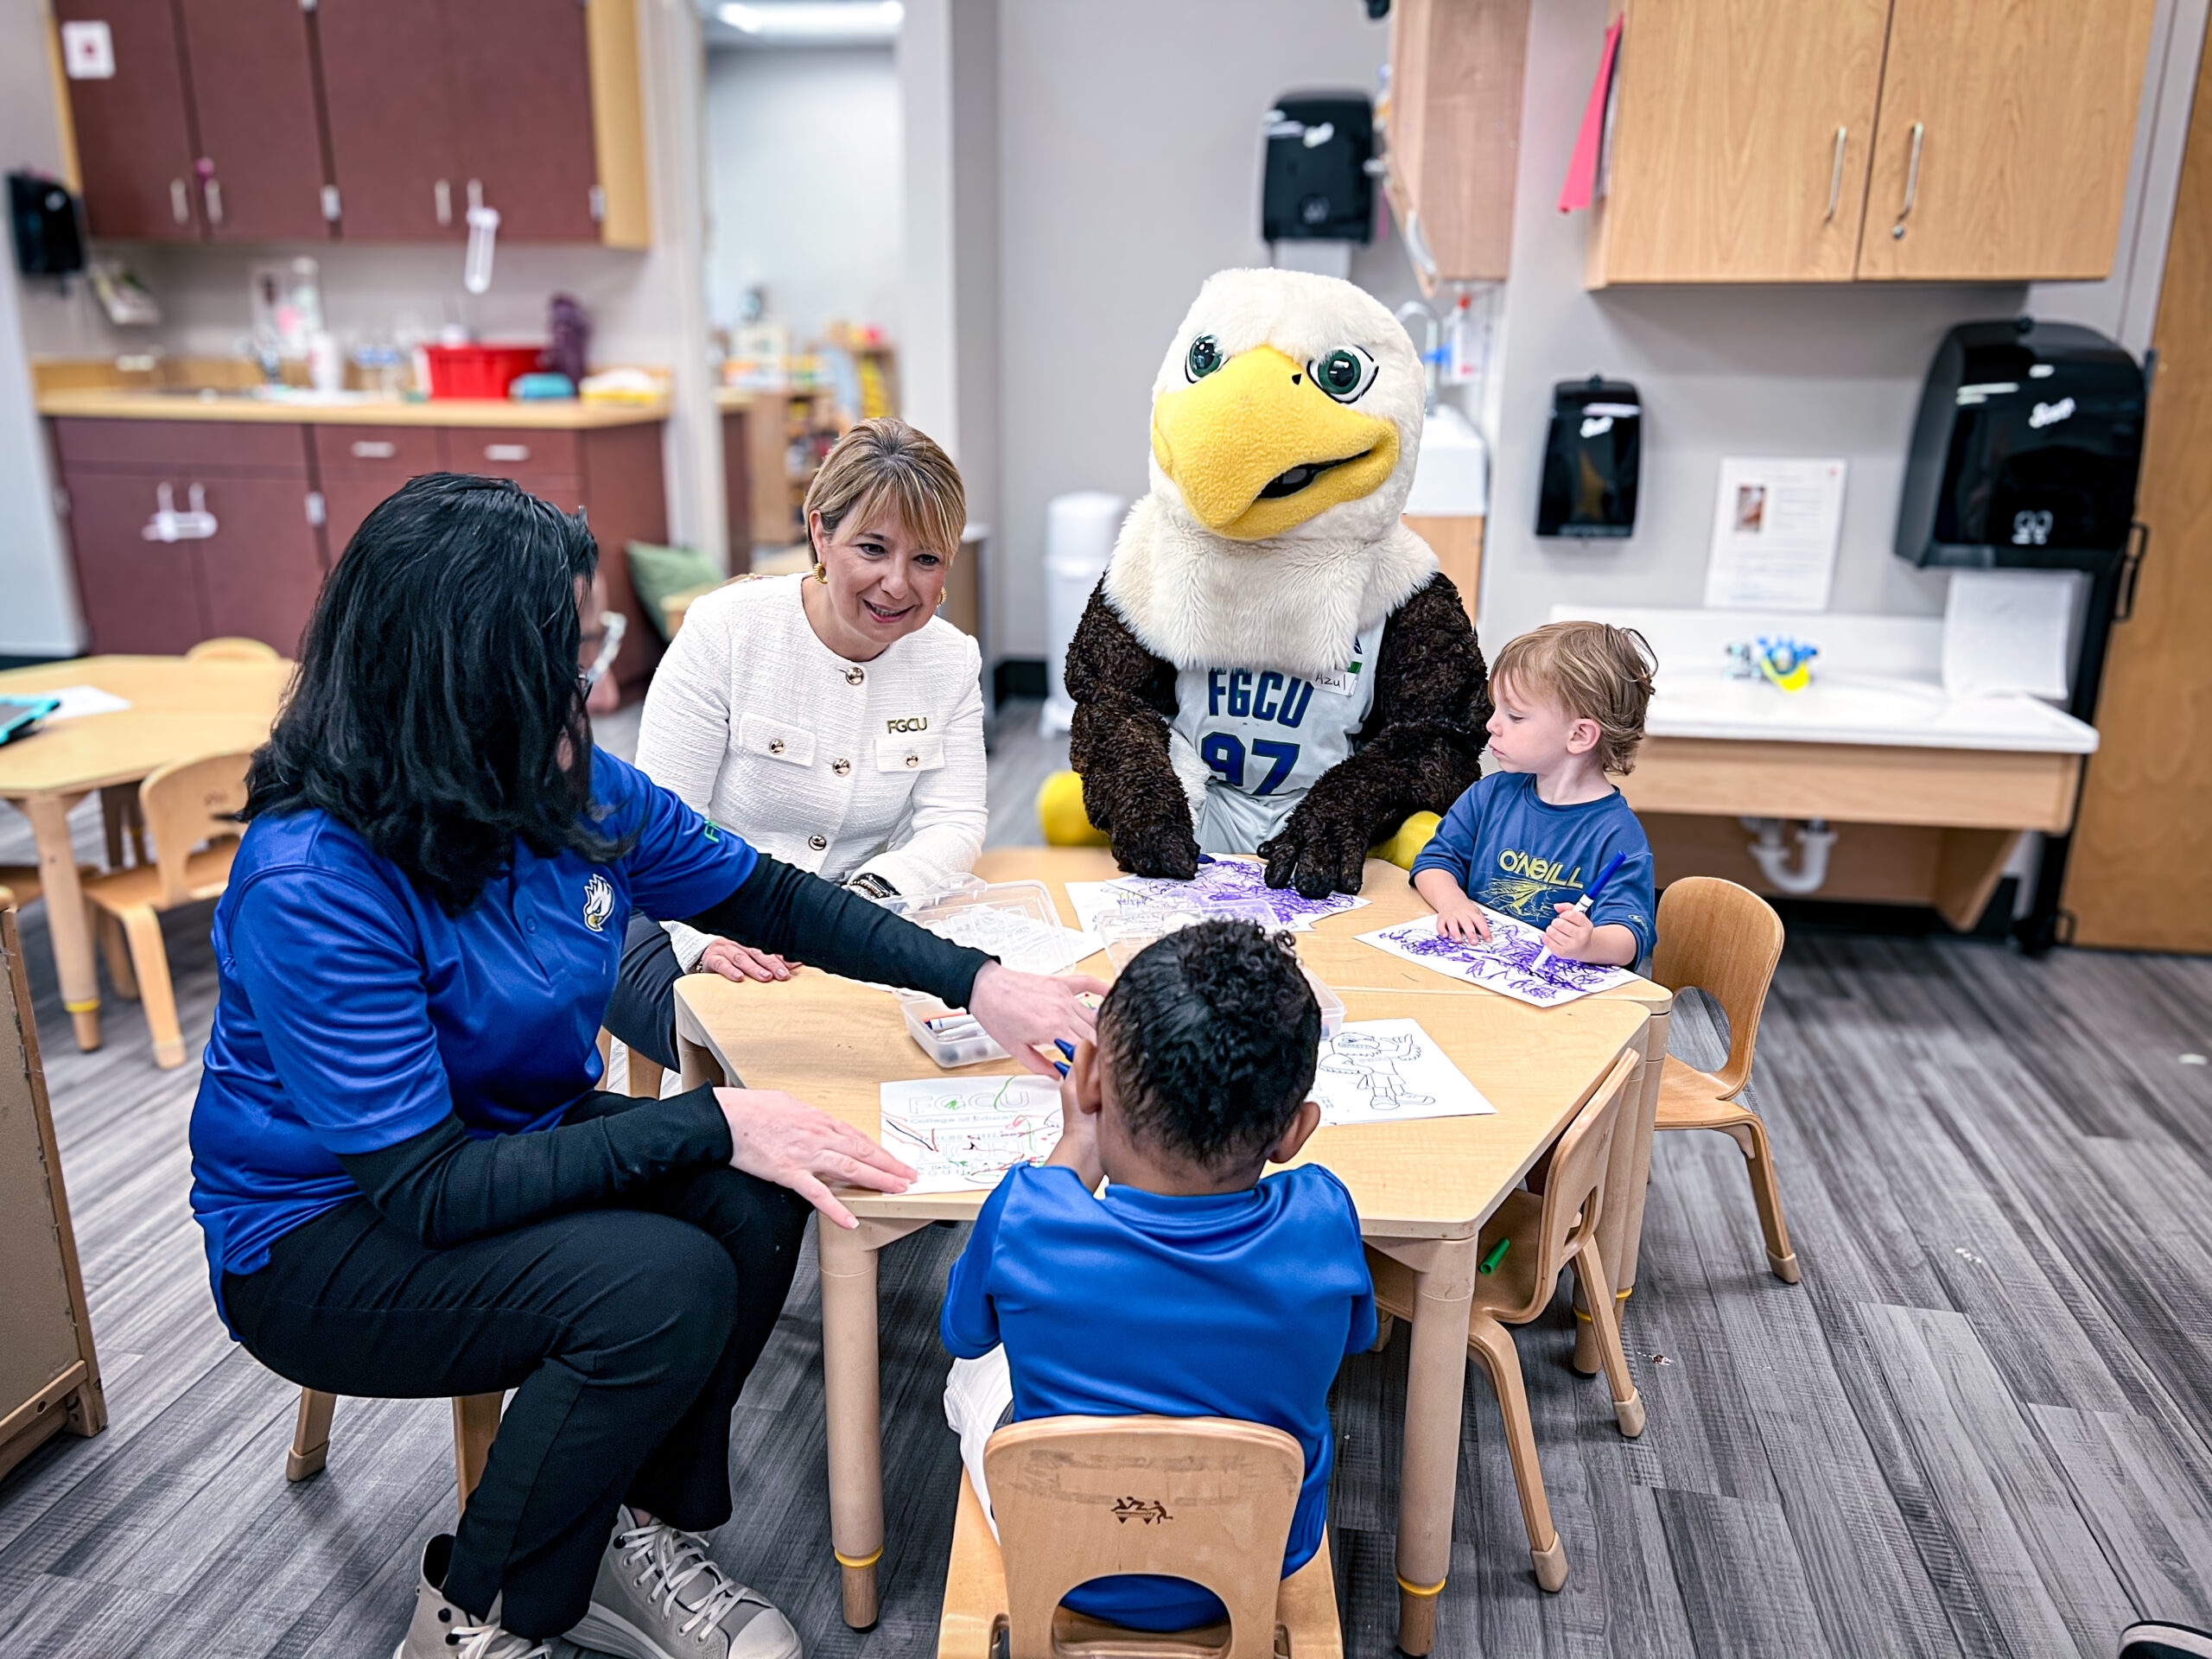 FGCU president Aysegul Timur and Azul work with children at the new Early Learning Childhood Development Center, a child care center in East Naples.